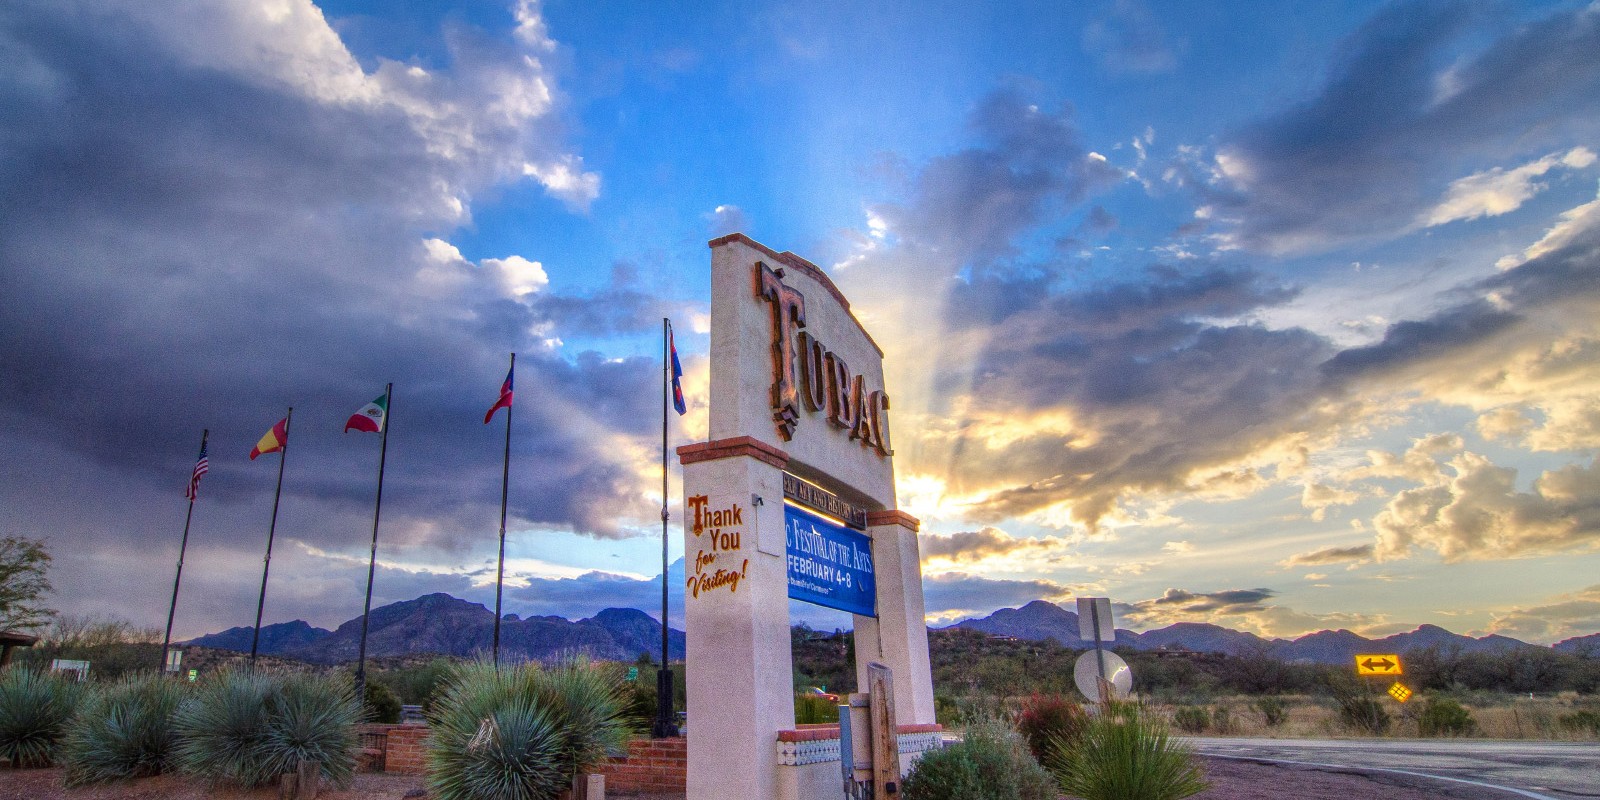 Vibrant rays of the setting sun emerge from behind the clouds. In the foreground, a sign welcoming people to the village of Tubac, Arizona.